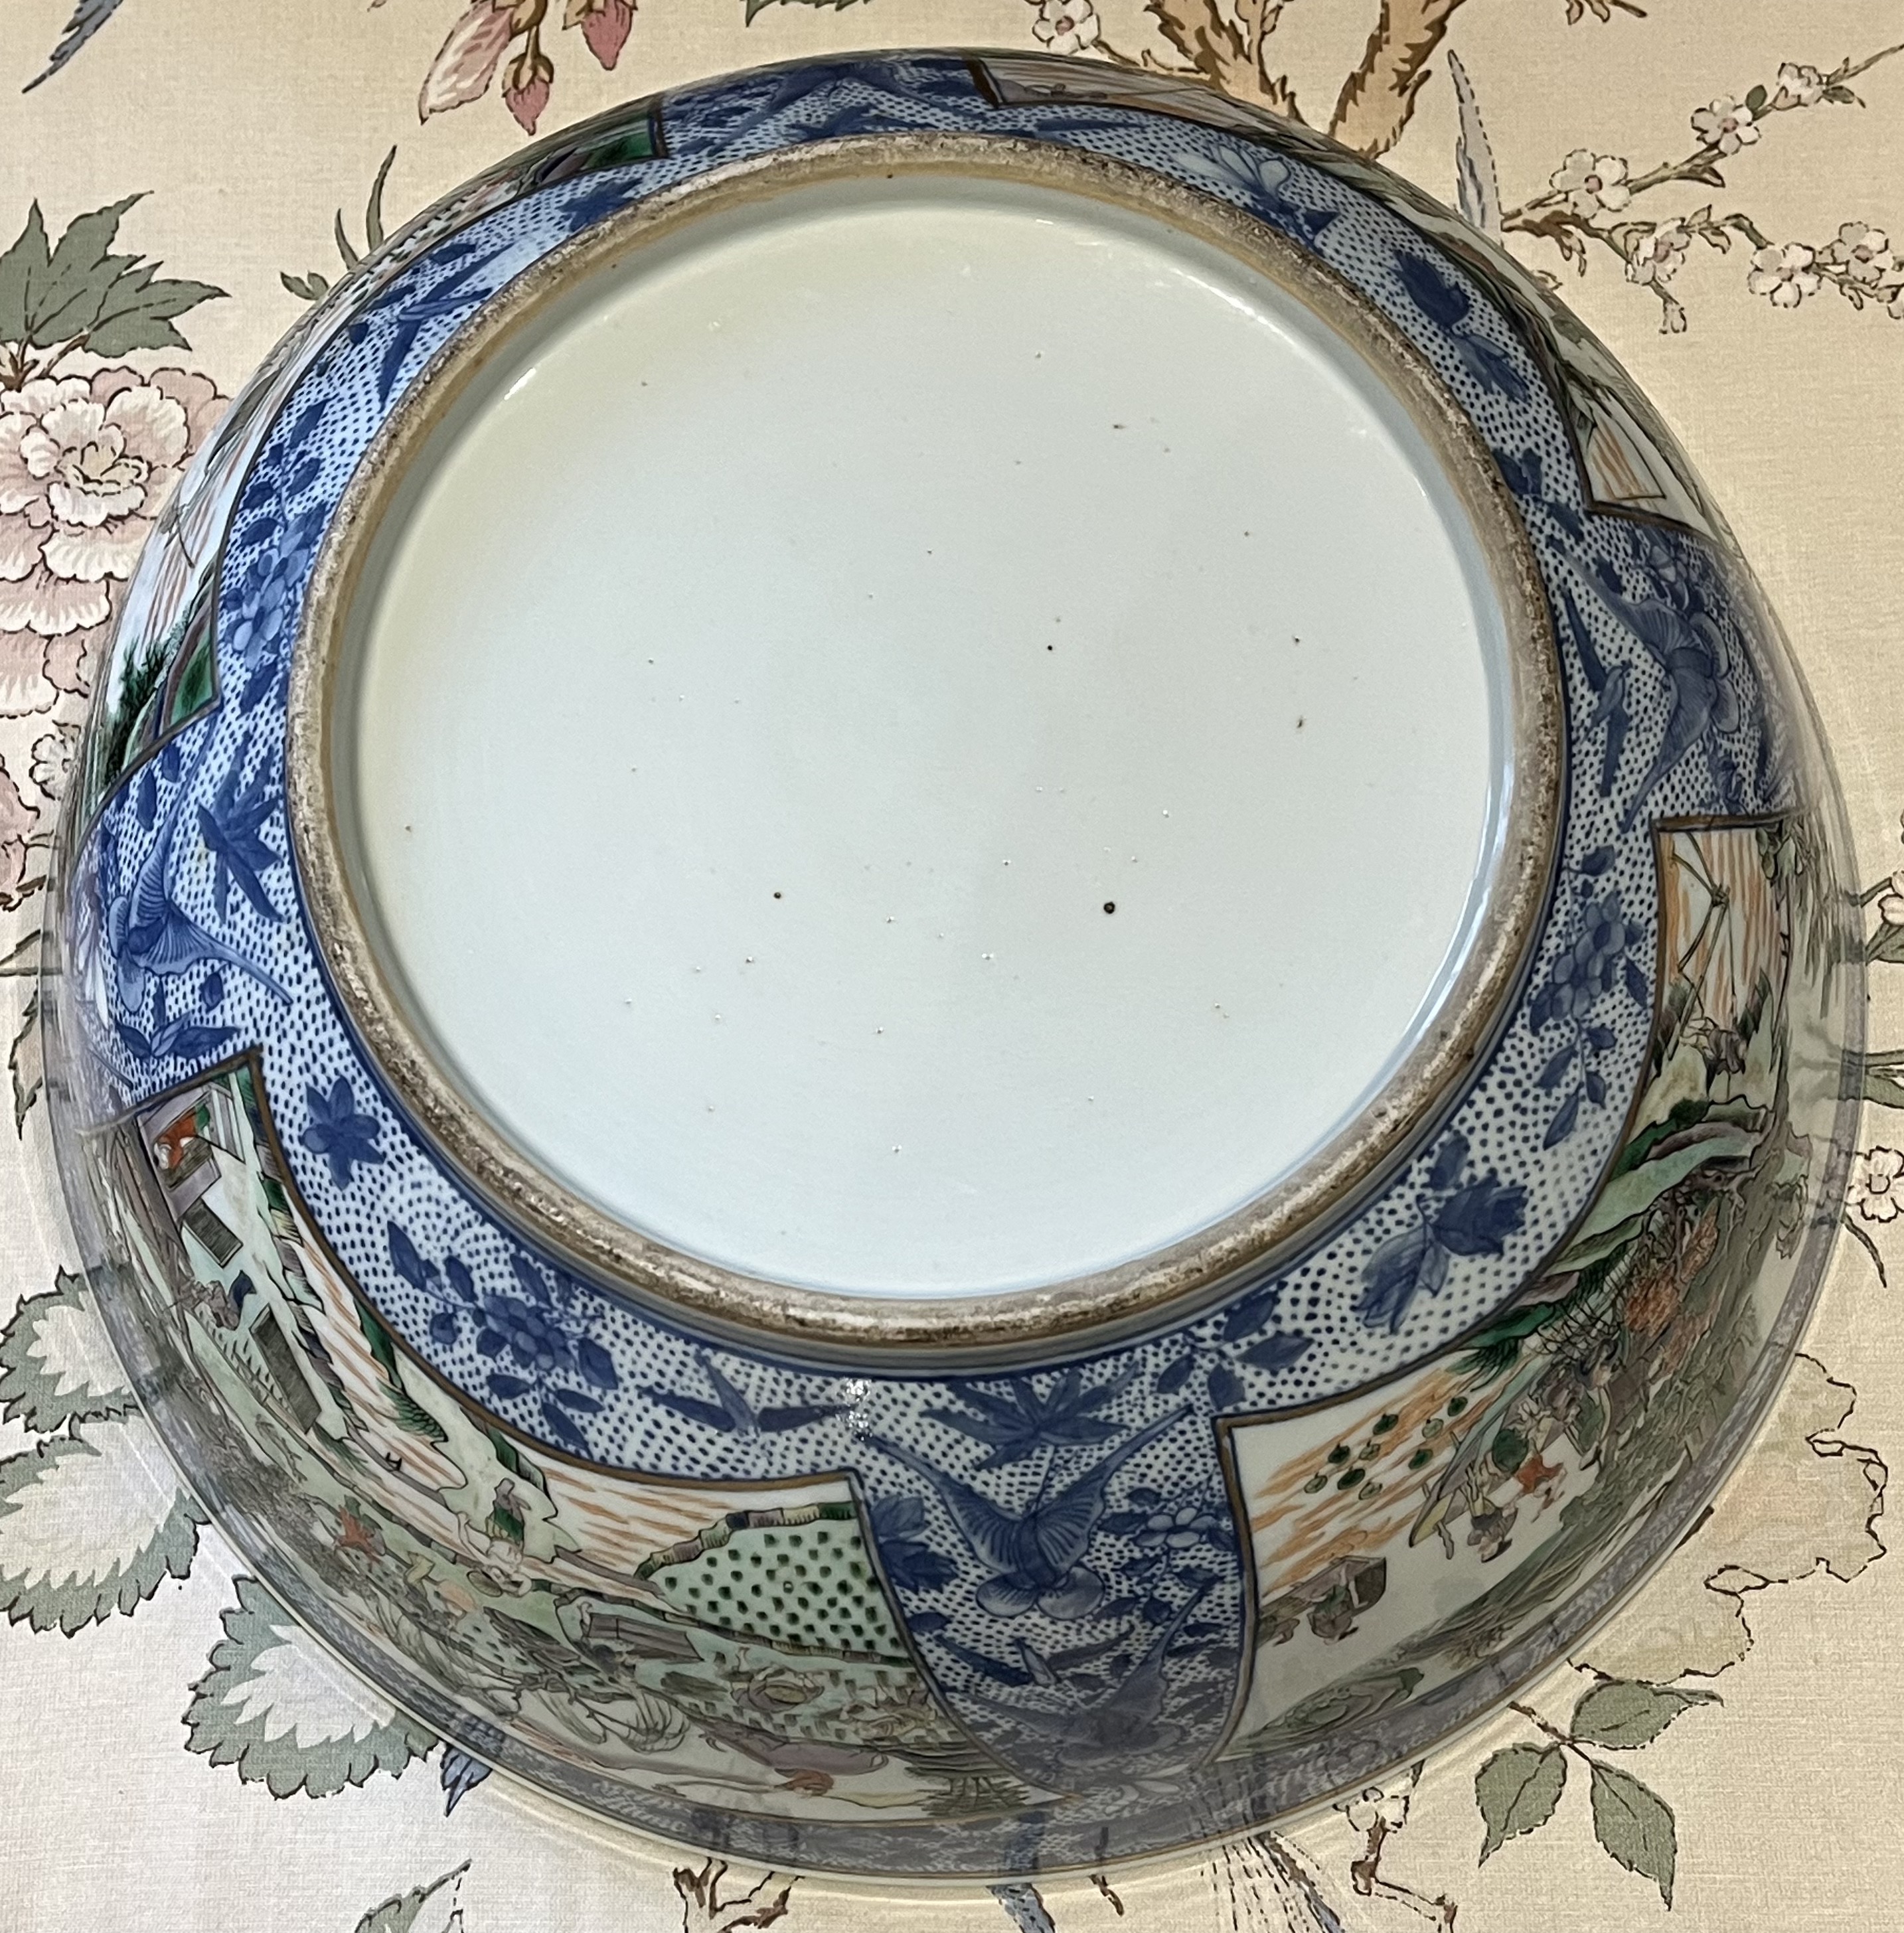 A LARGE CHINESE UNDERGLAZE-BLUE AND 'FAMILLE-VERTE' PUNCHBOWL, QING DYNASTY, 19TH CENTURY - Image 8 of 12